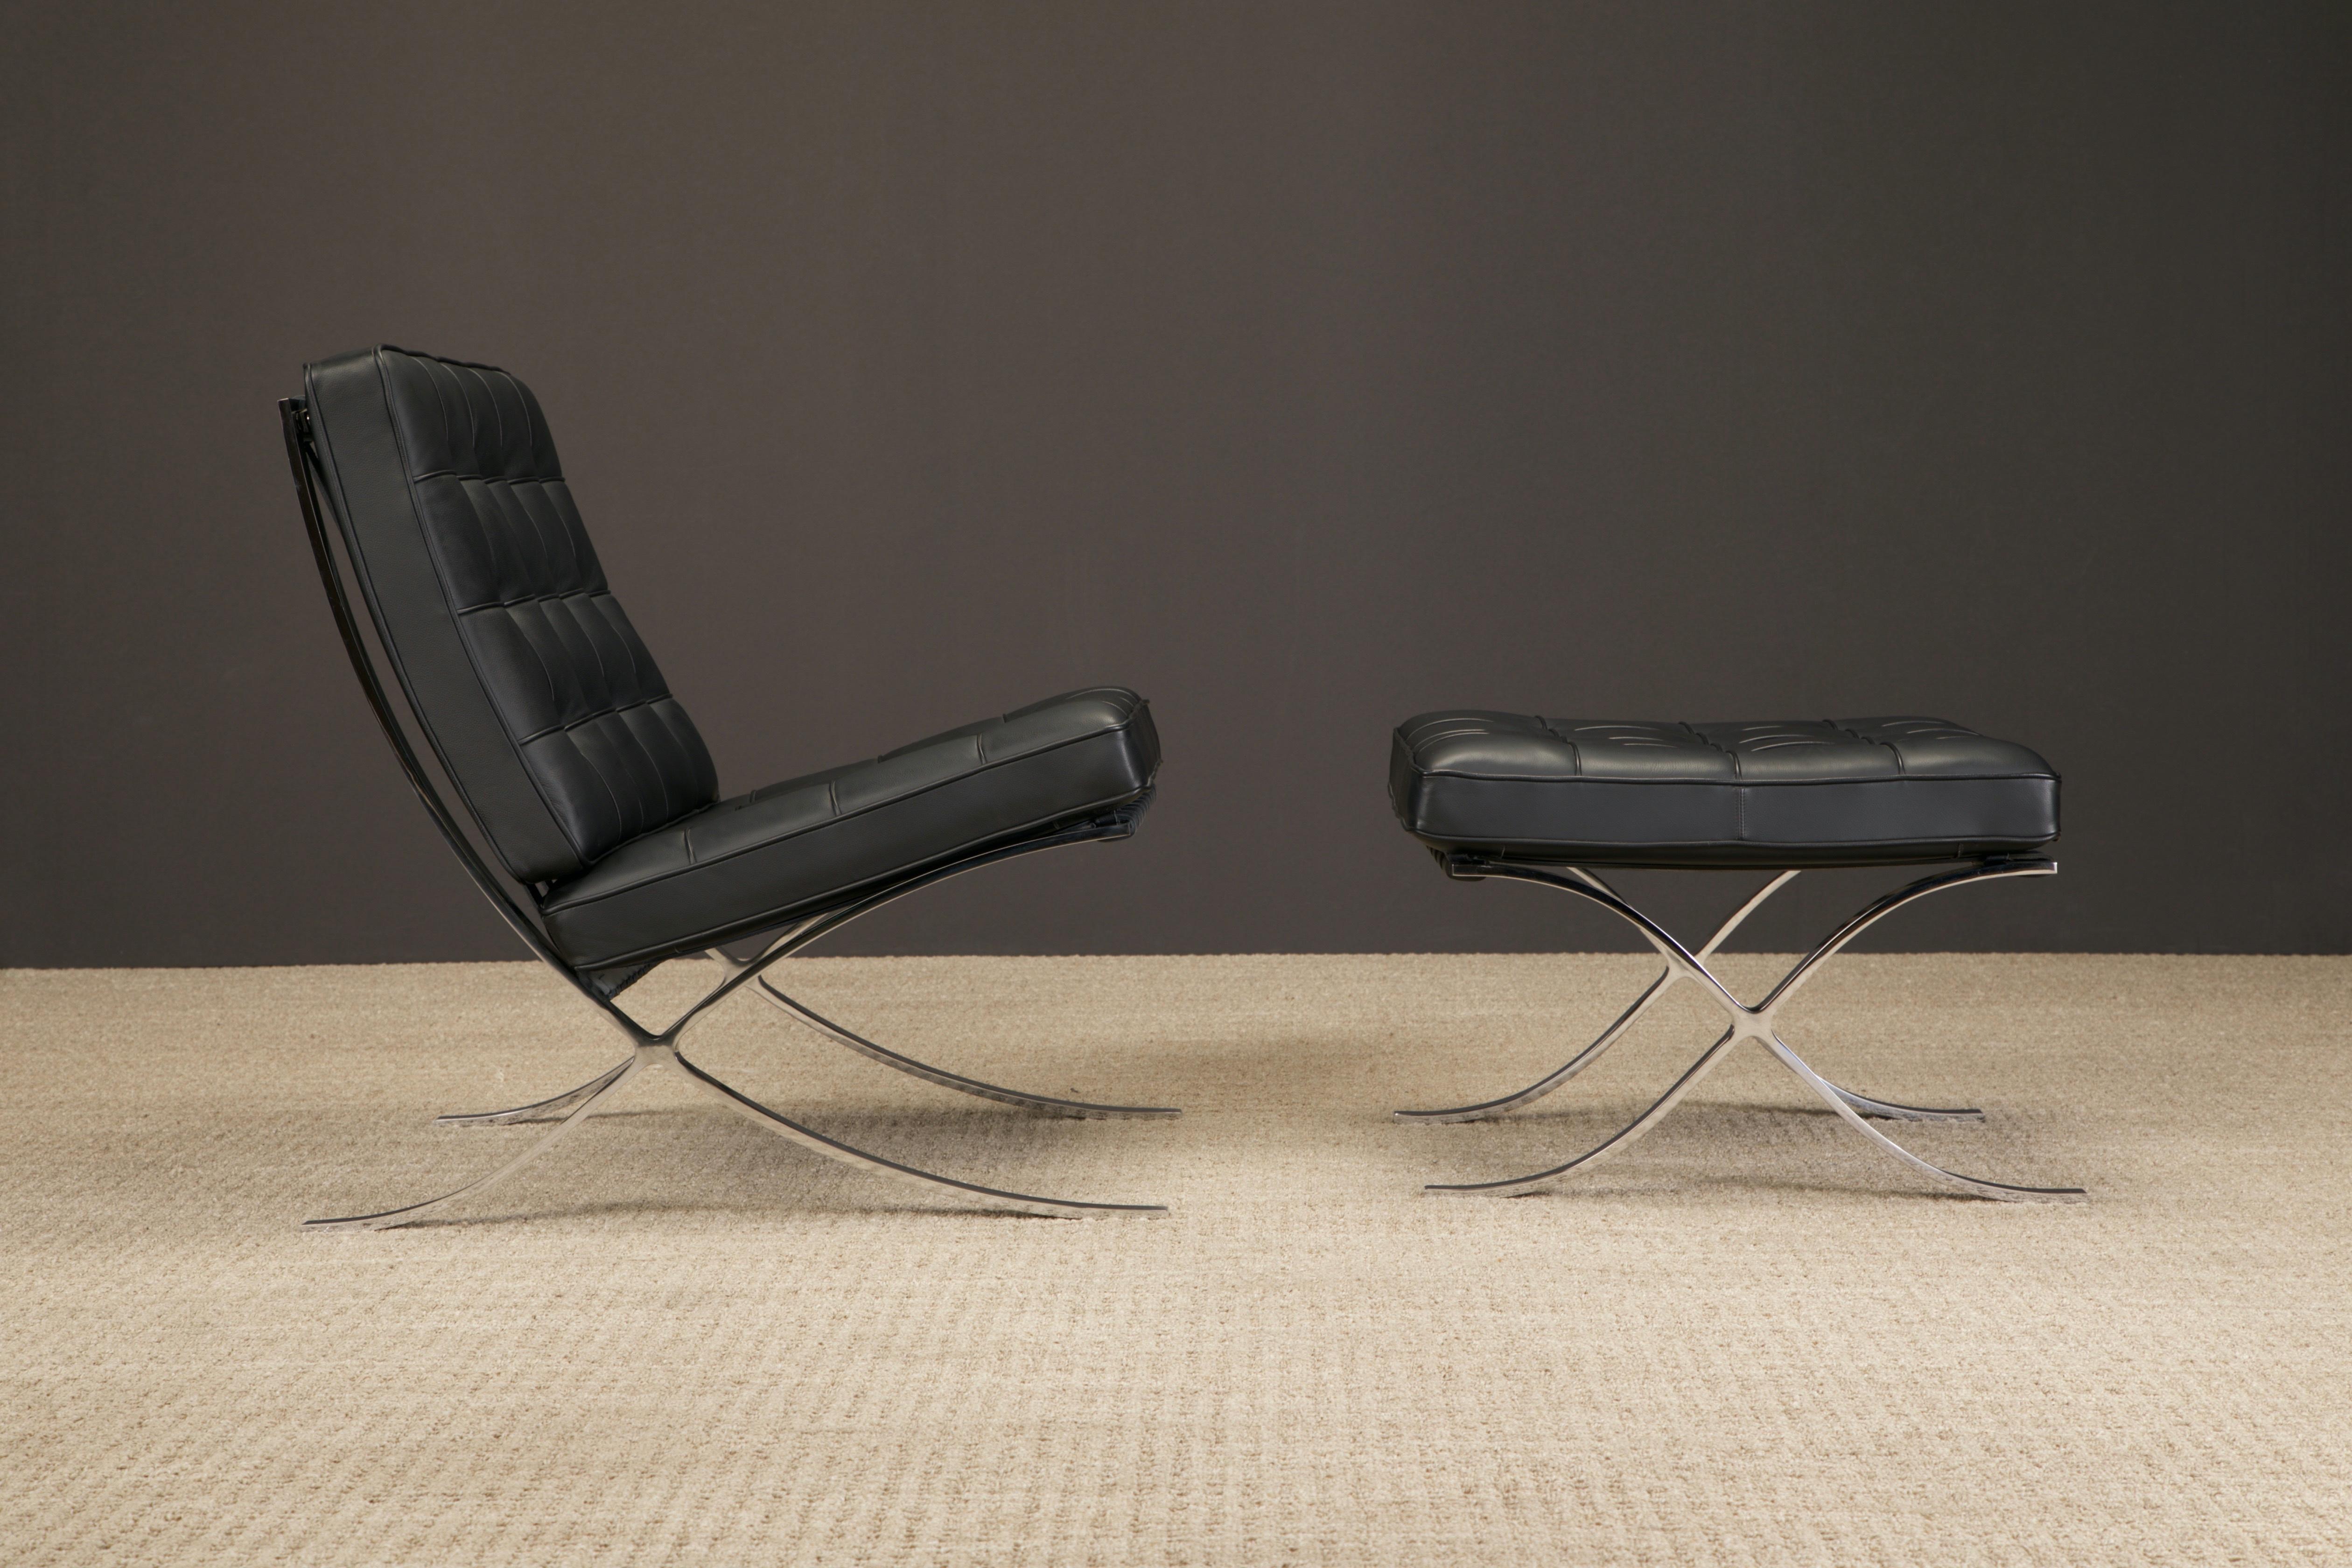 American Barcelona Lounge Chair & Ottoman by Mies van der Rohe for Knoll Studios, Signed